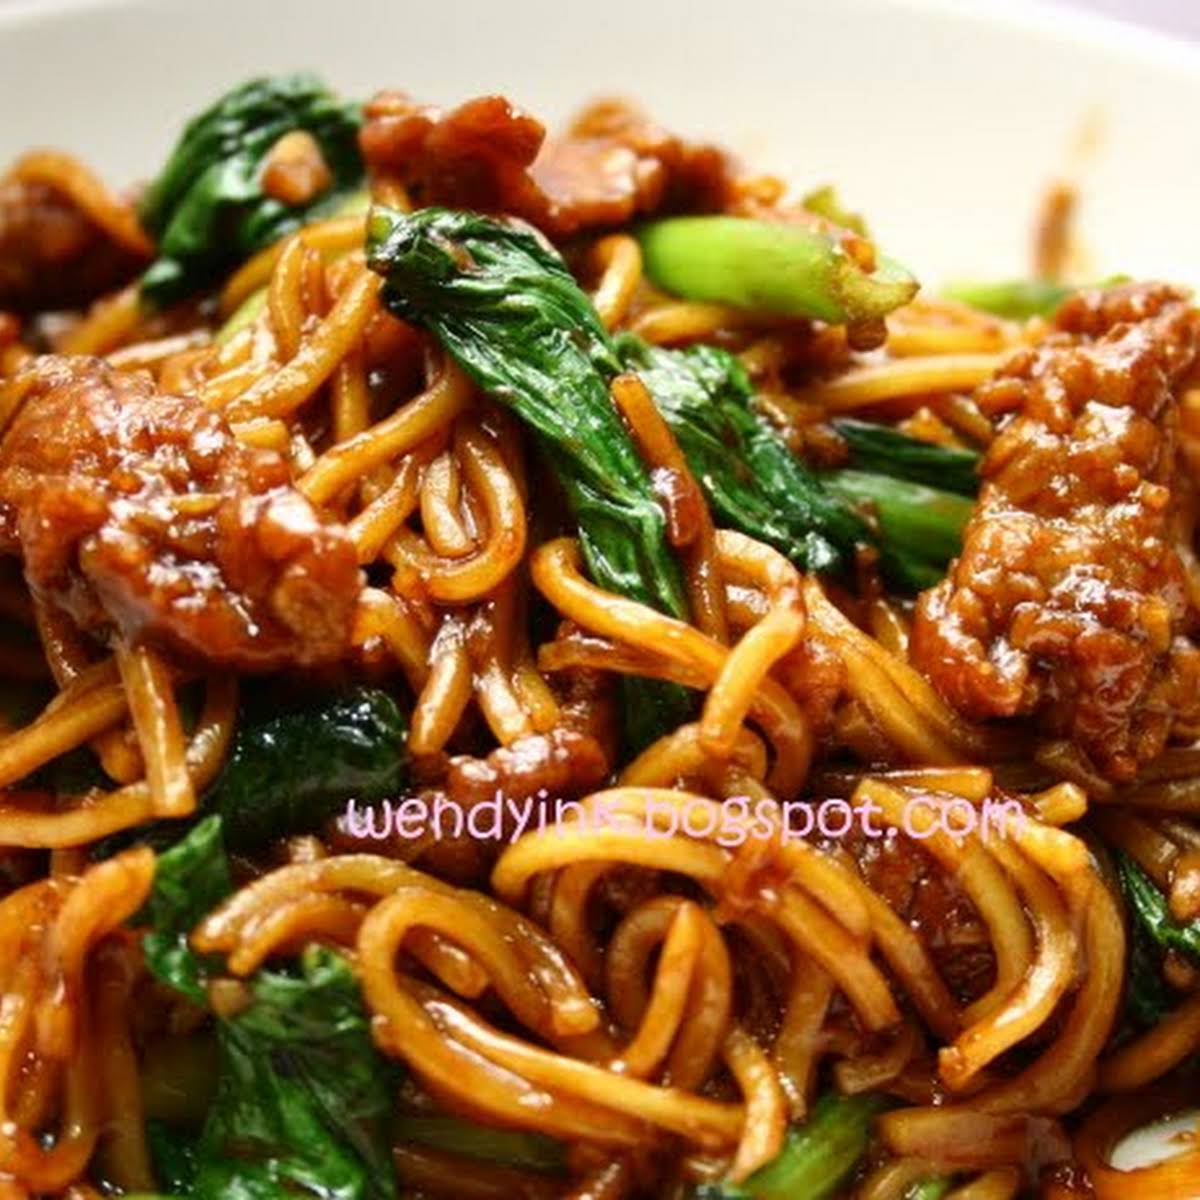 Fried Beef Noodles 炒牛肉面